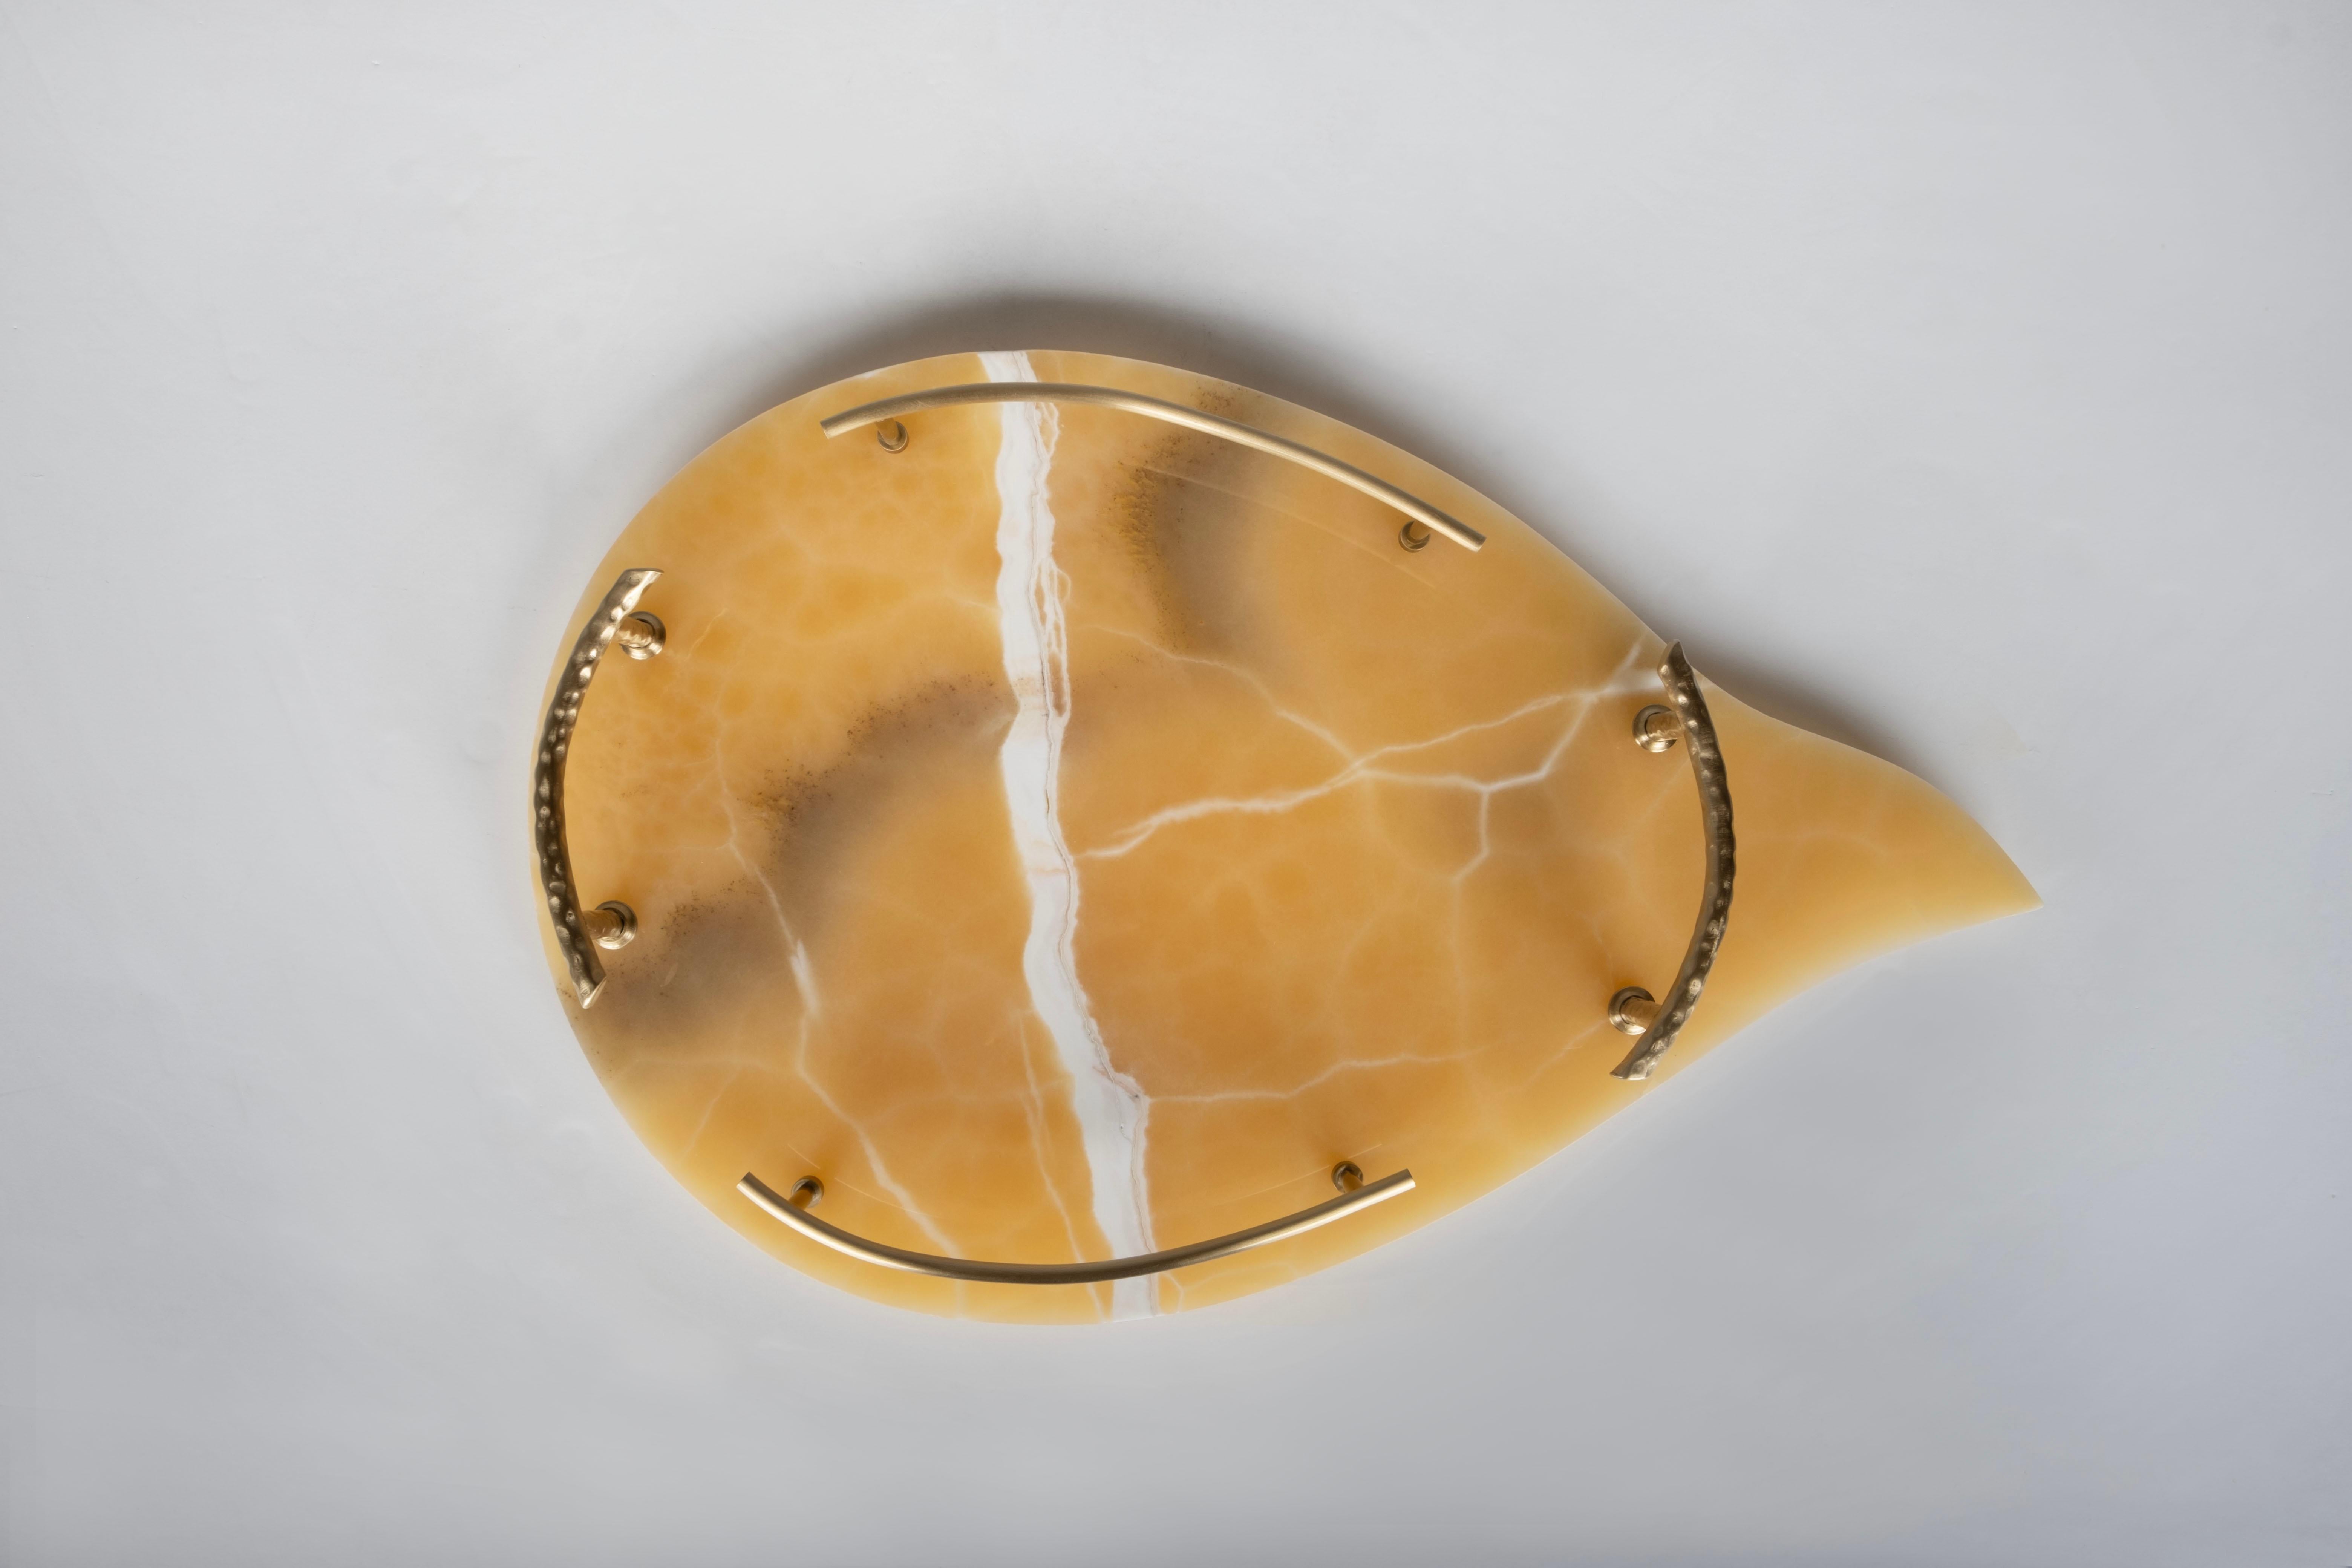 Serving Tray Sakai, Lusitanus Home Collection, Handcrafted in Portugal - Europe by Lusitanus Home.

A sublime serving tray, Sakai was design to uplift layback moments. An organic-shape serving tray in Orange Onyx stone with brass handles in